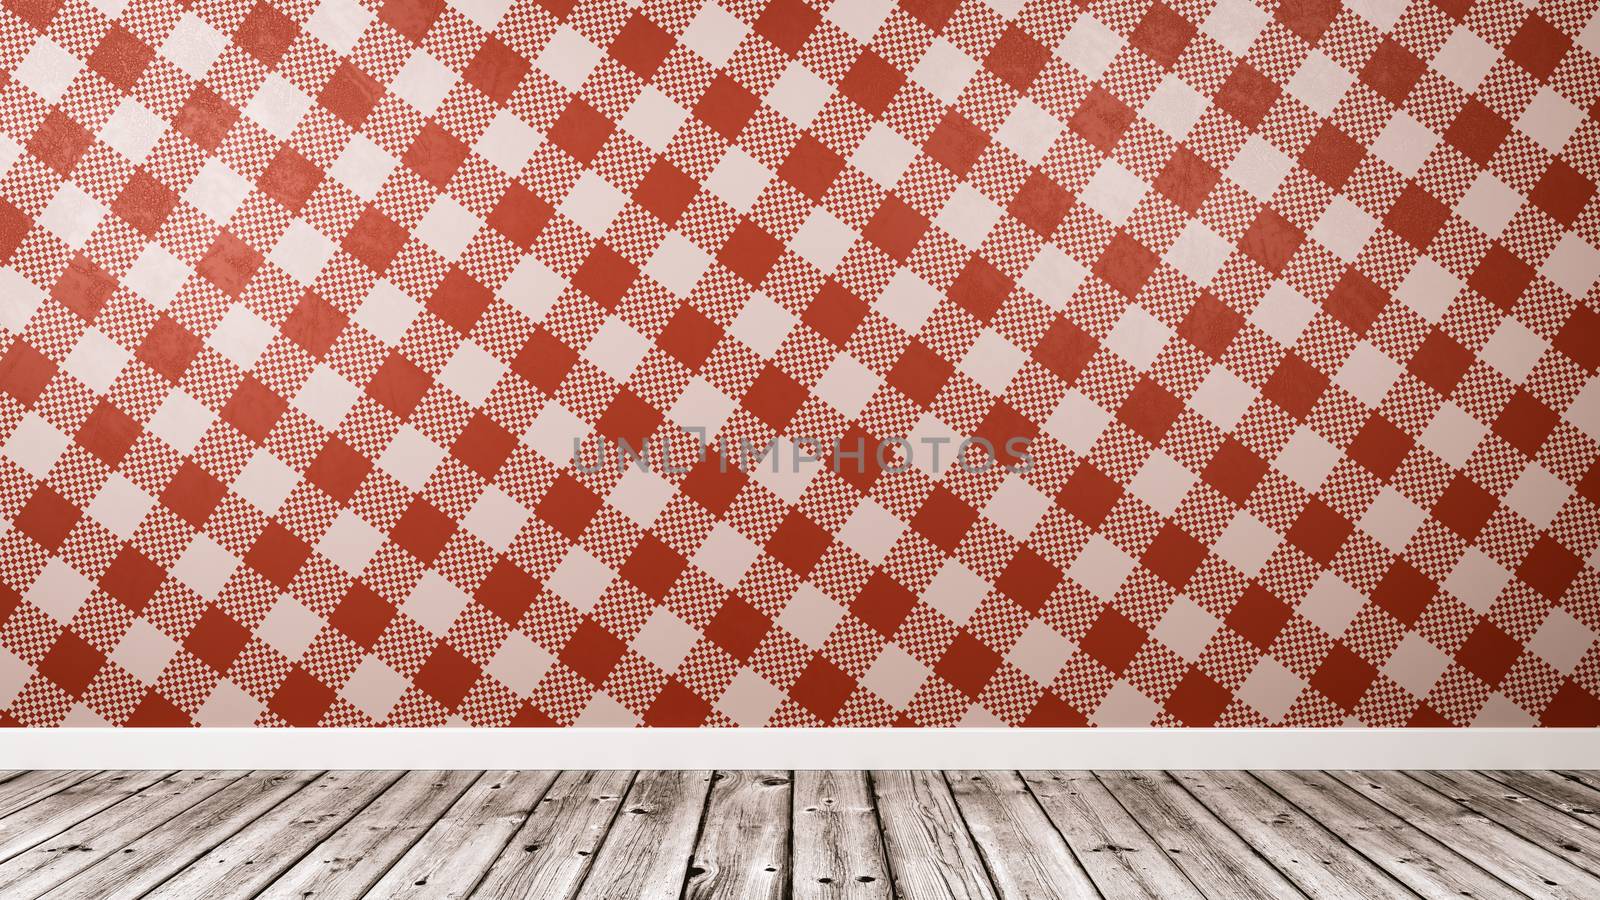 Empty Room with Restaurant Table Cloth Style Red Wall and Wooden Floor 3D Illustration